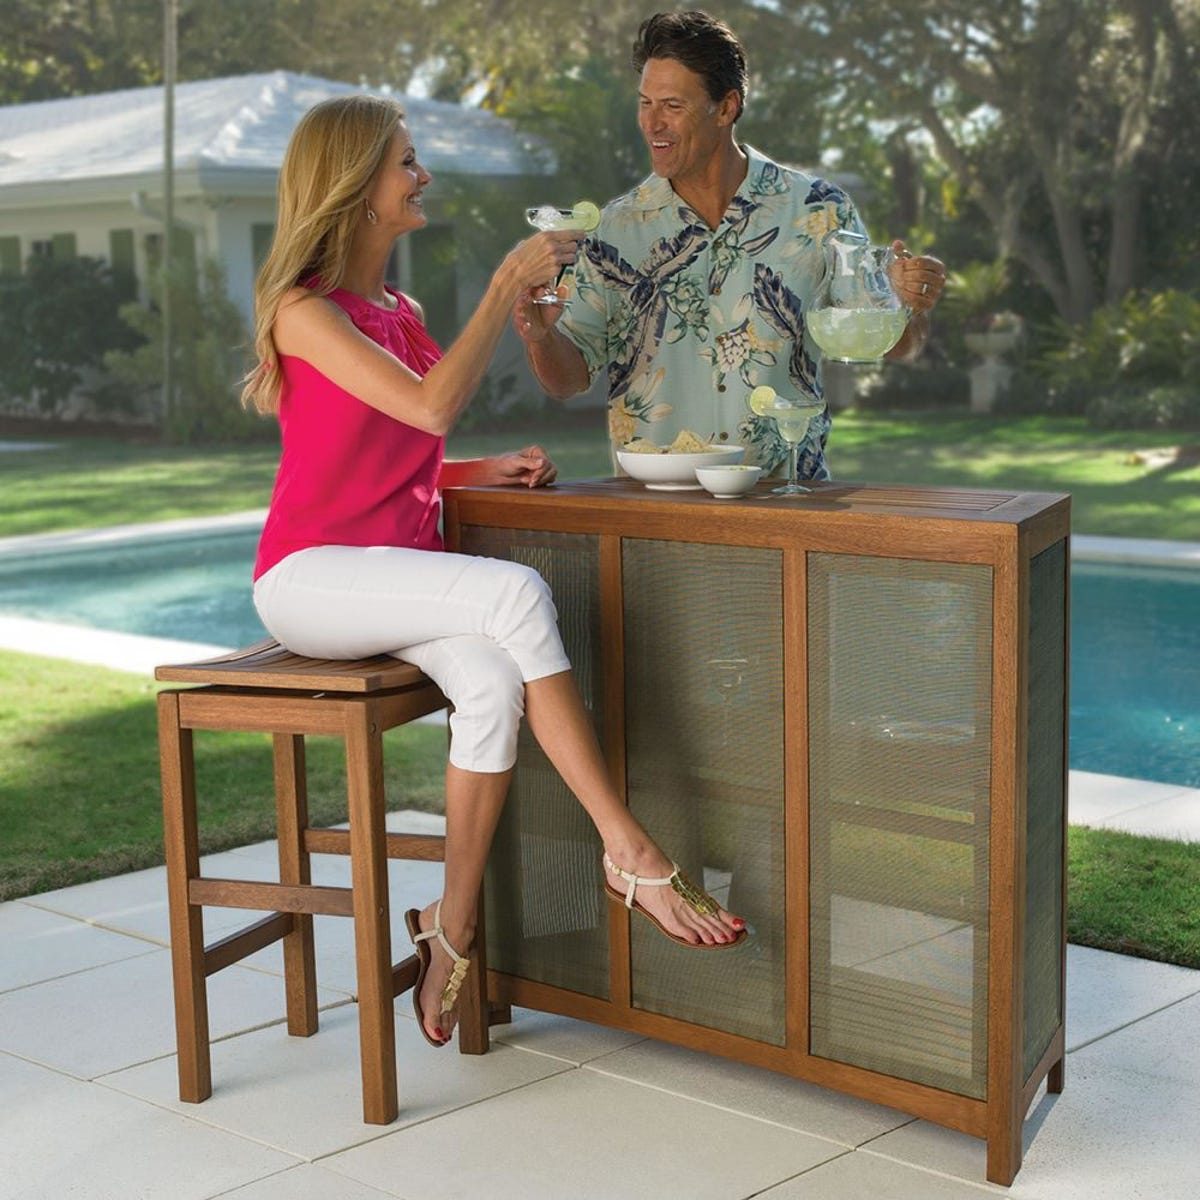 The Fortaleza Folding Outdoor Bar And Stools is ready for a party anytime, anywhere.